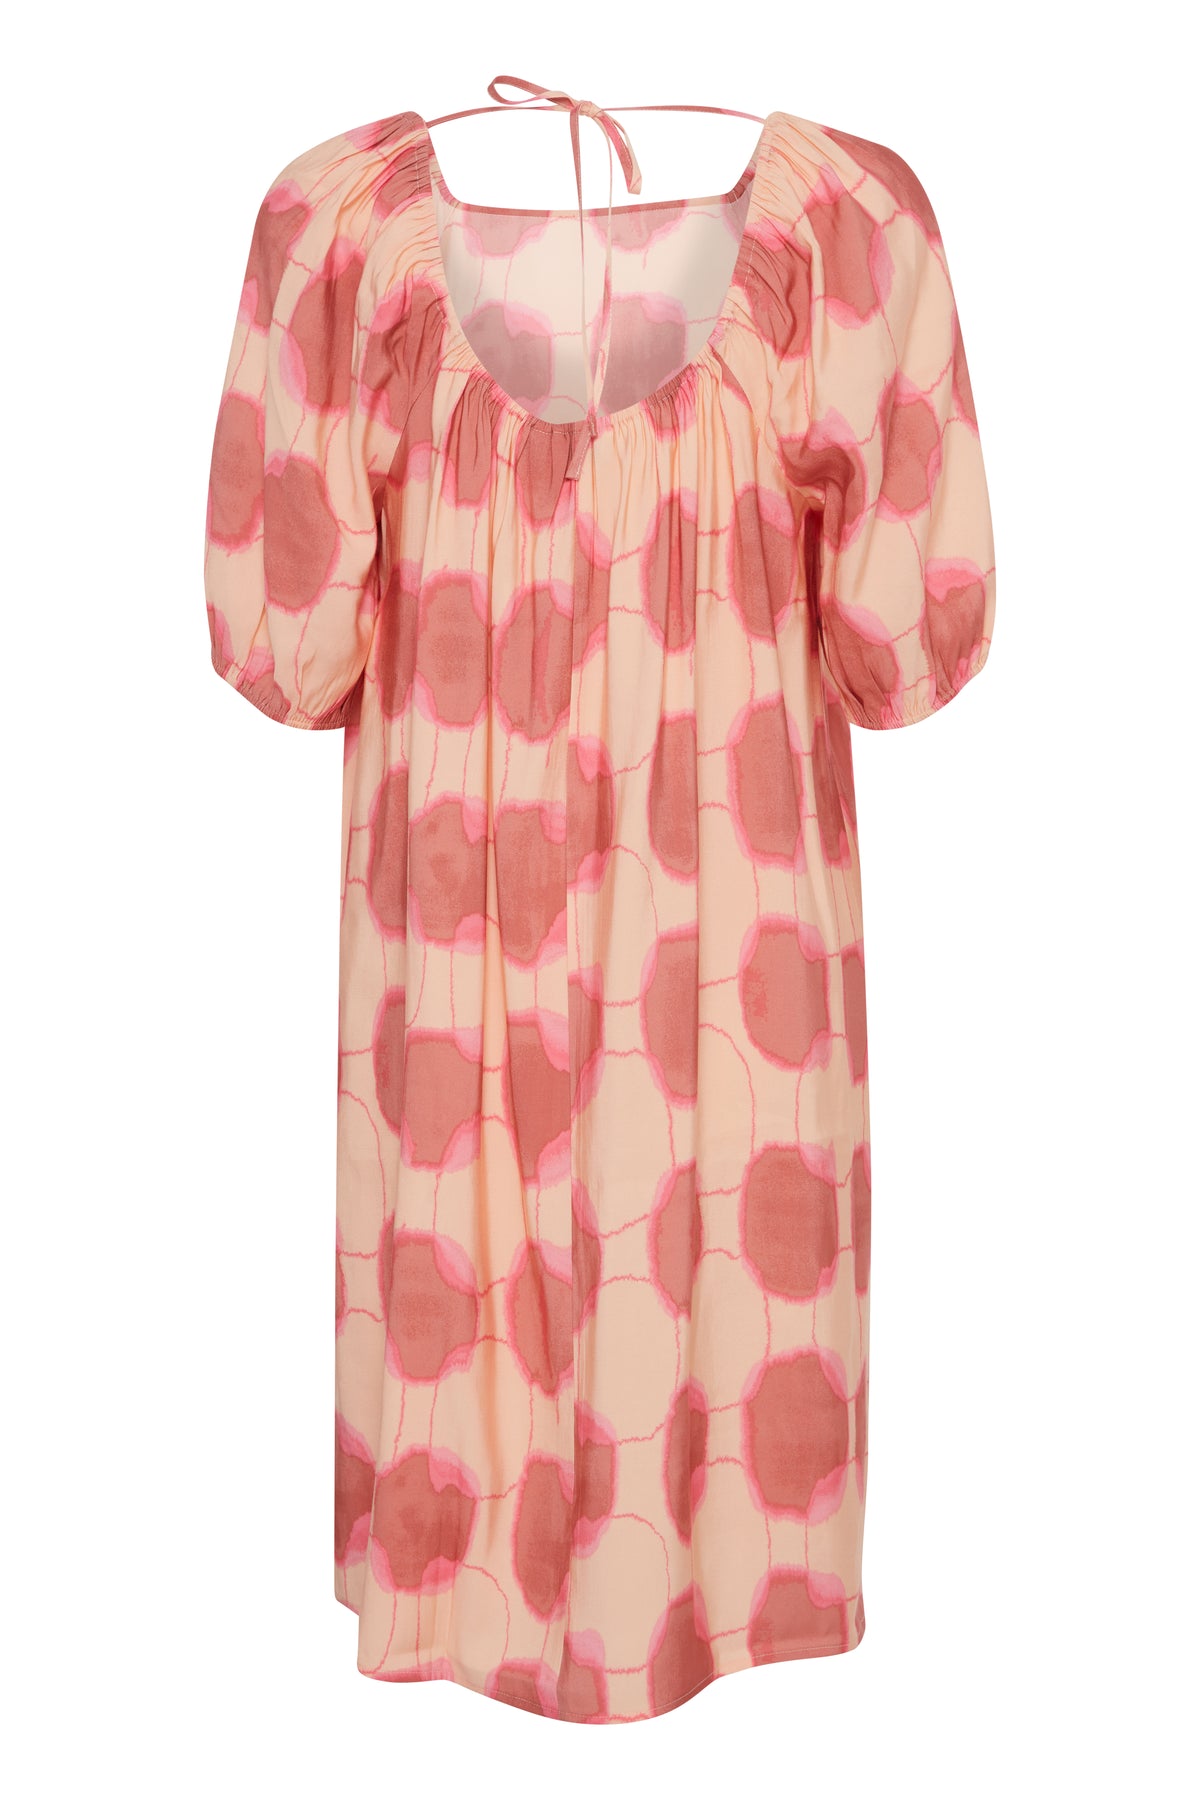 B.Young Hanva Pink Tie Dye Mix Printed Relaxed Fit Dress, 20814921